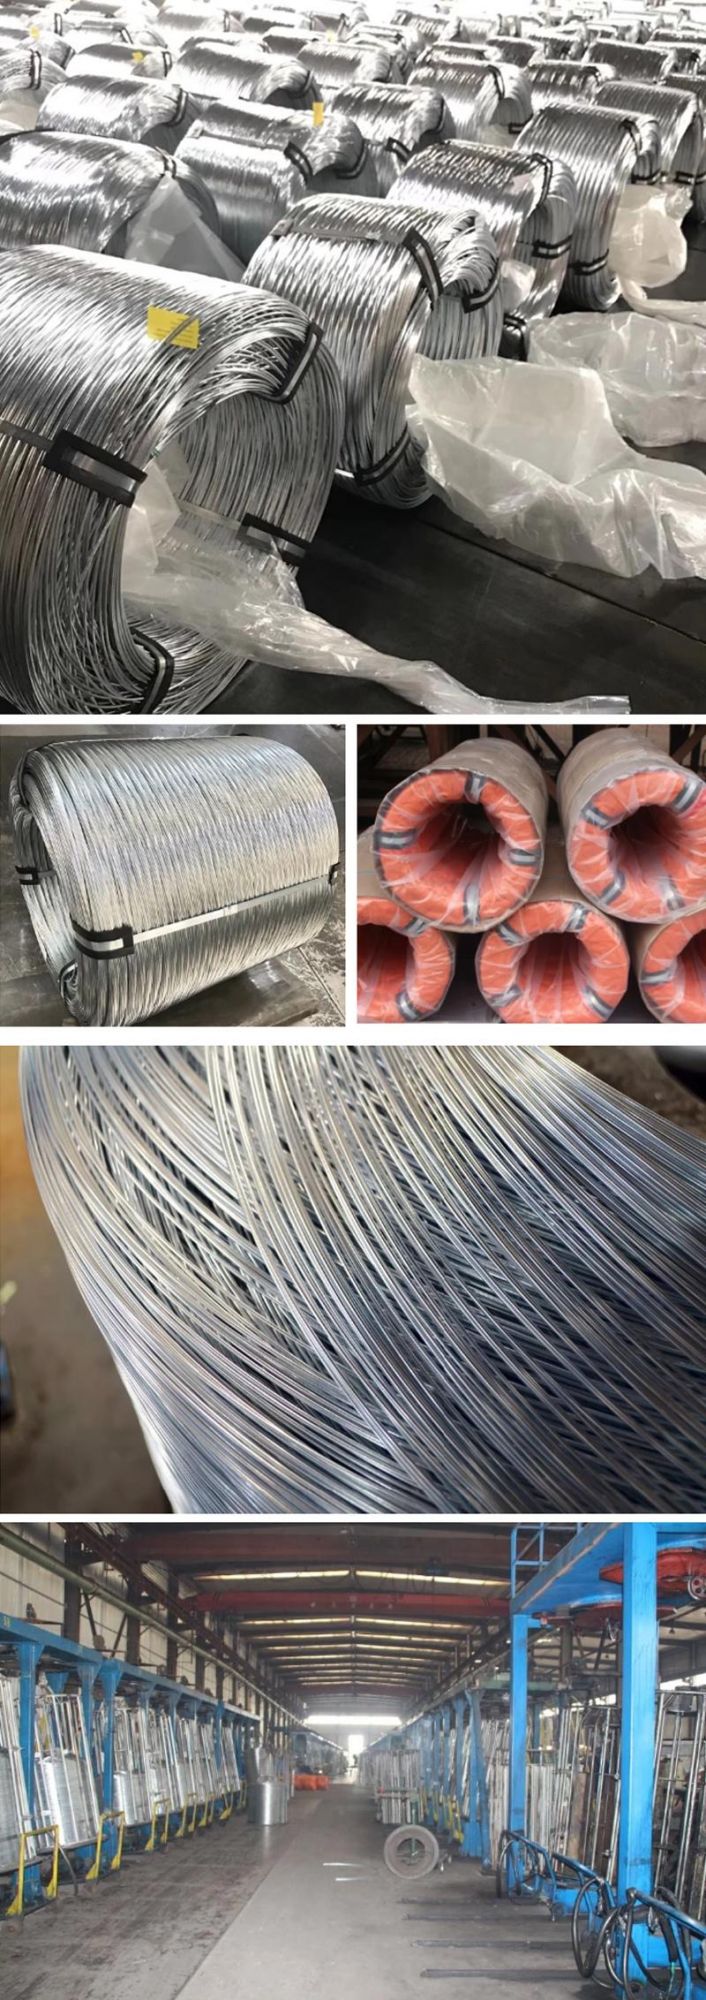 Hot Selling 2.10mm 2.20mm Mattress Spring Steel Wire